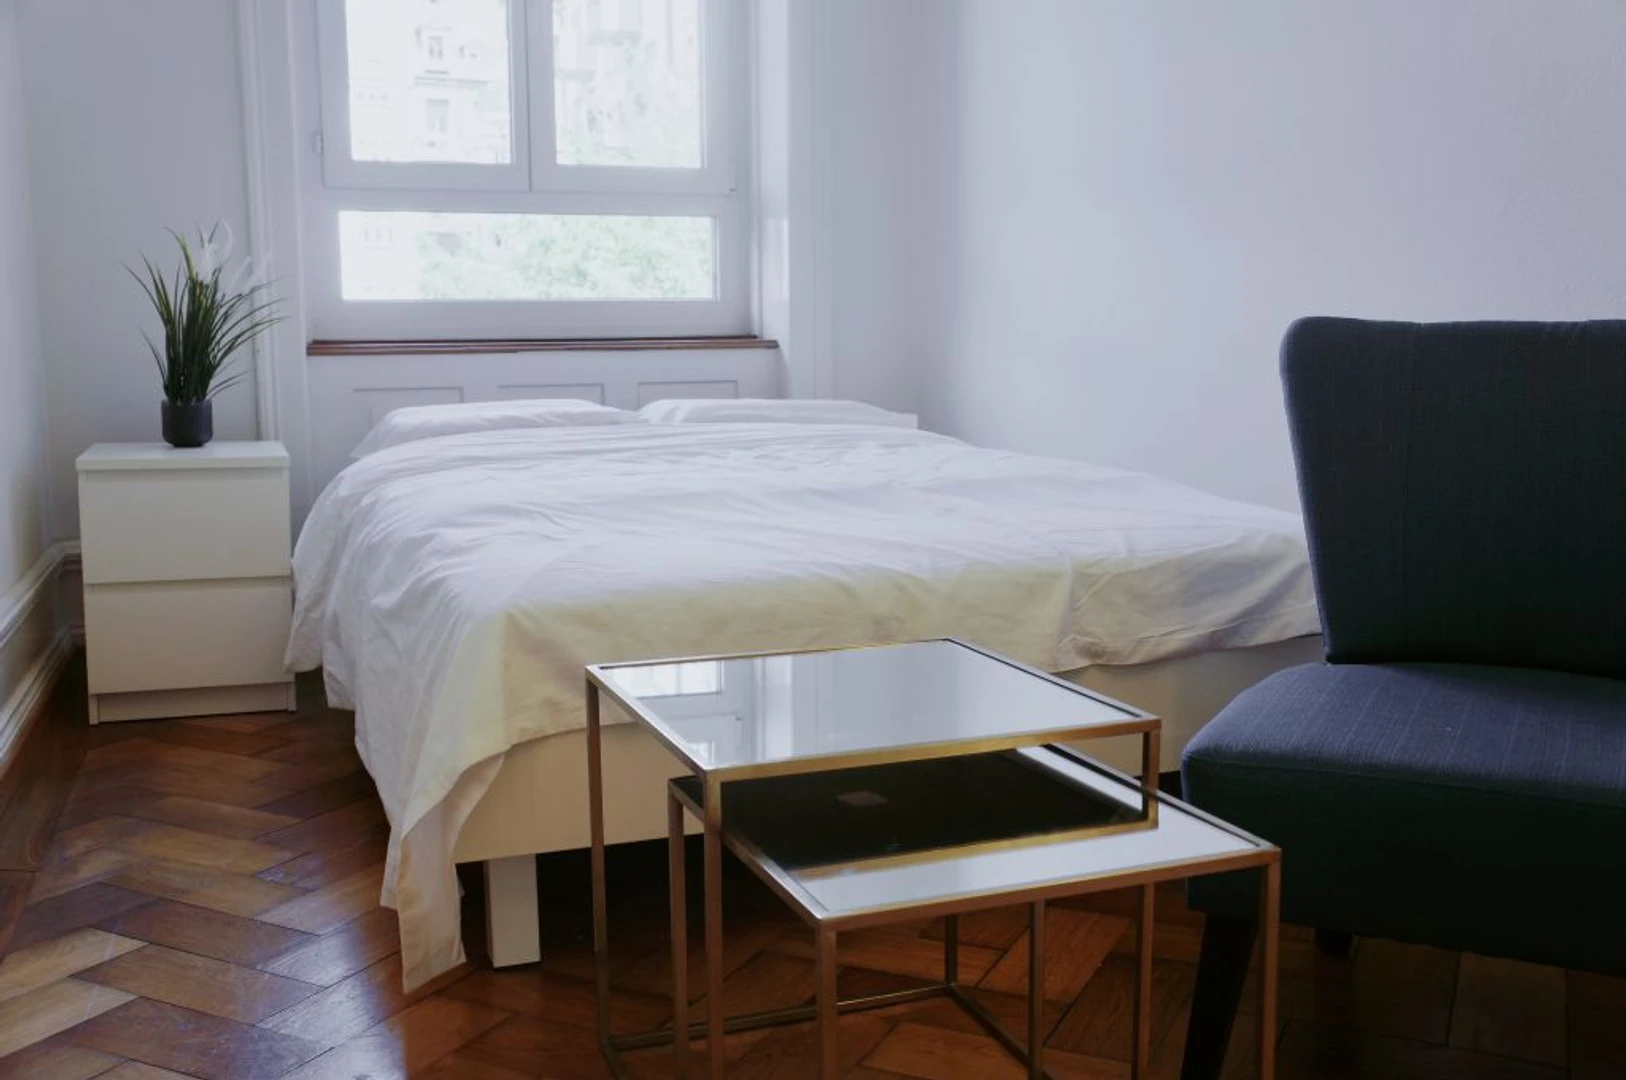 Room for rent in a shared flat in zurich